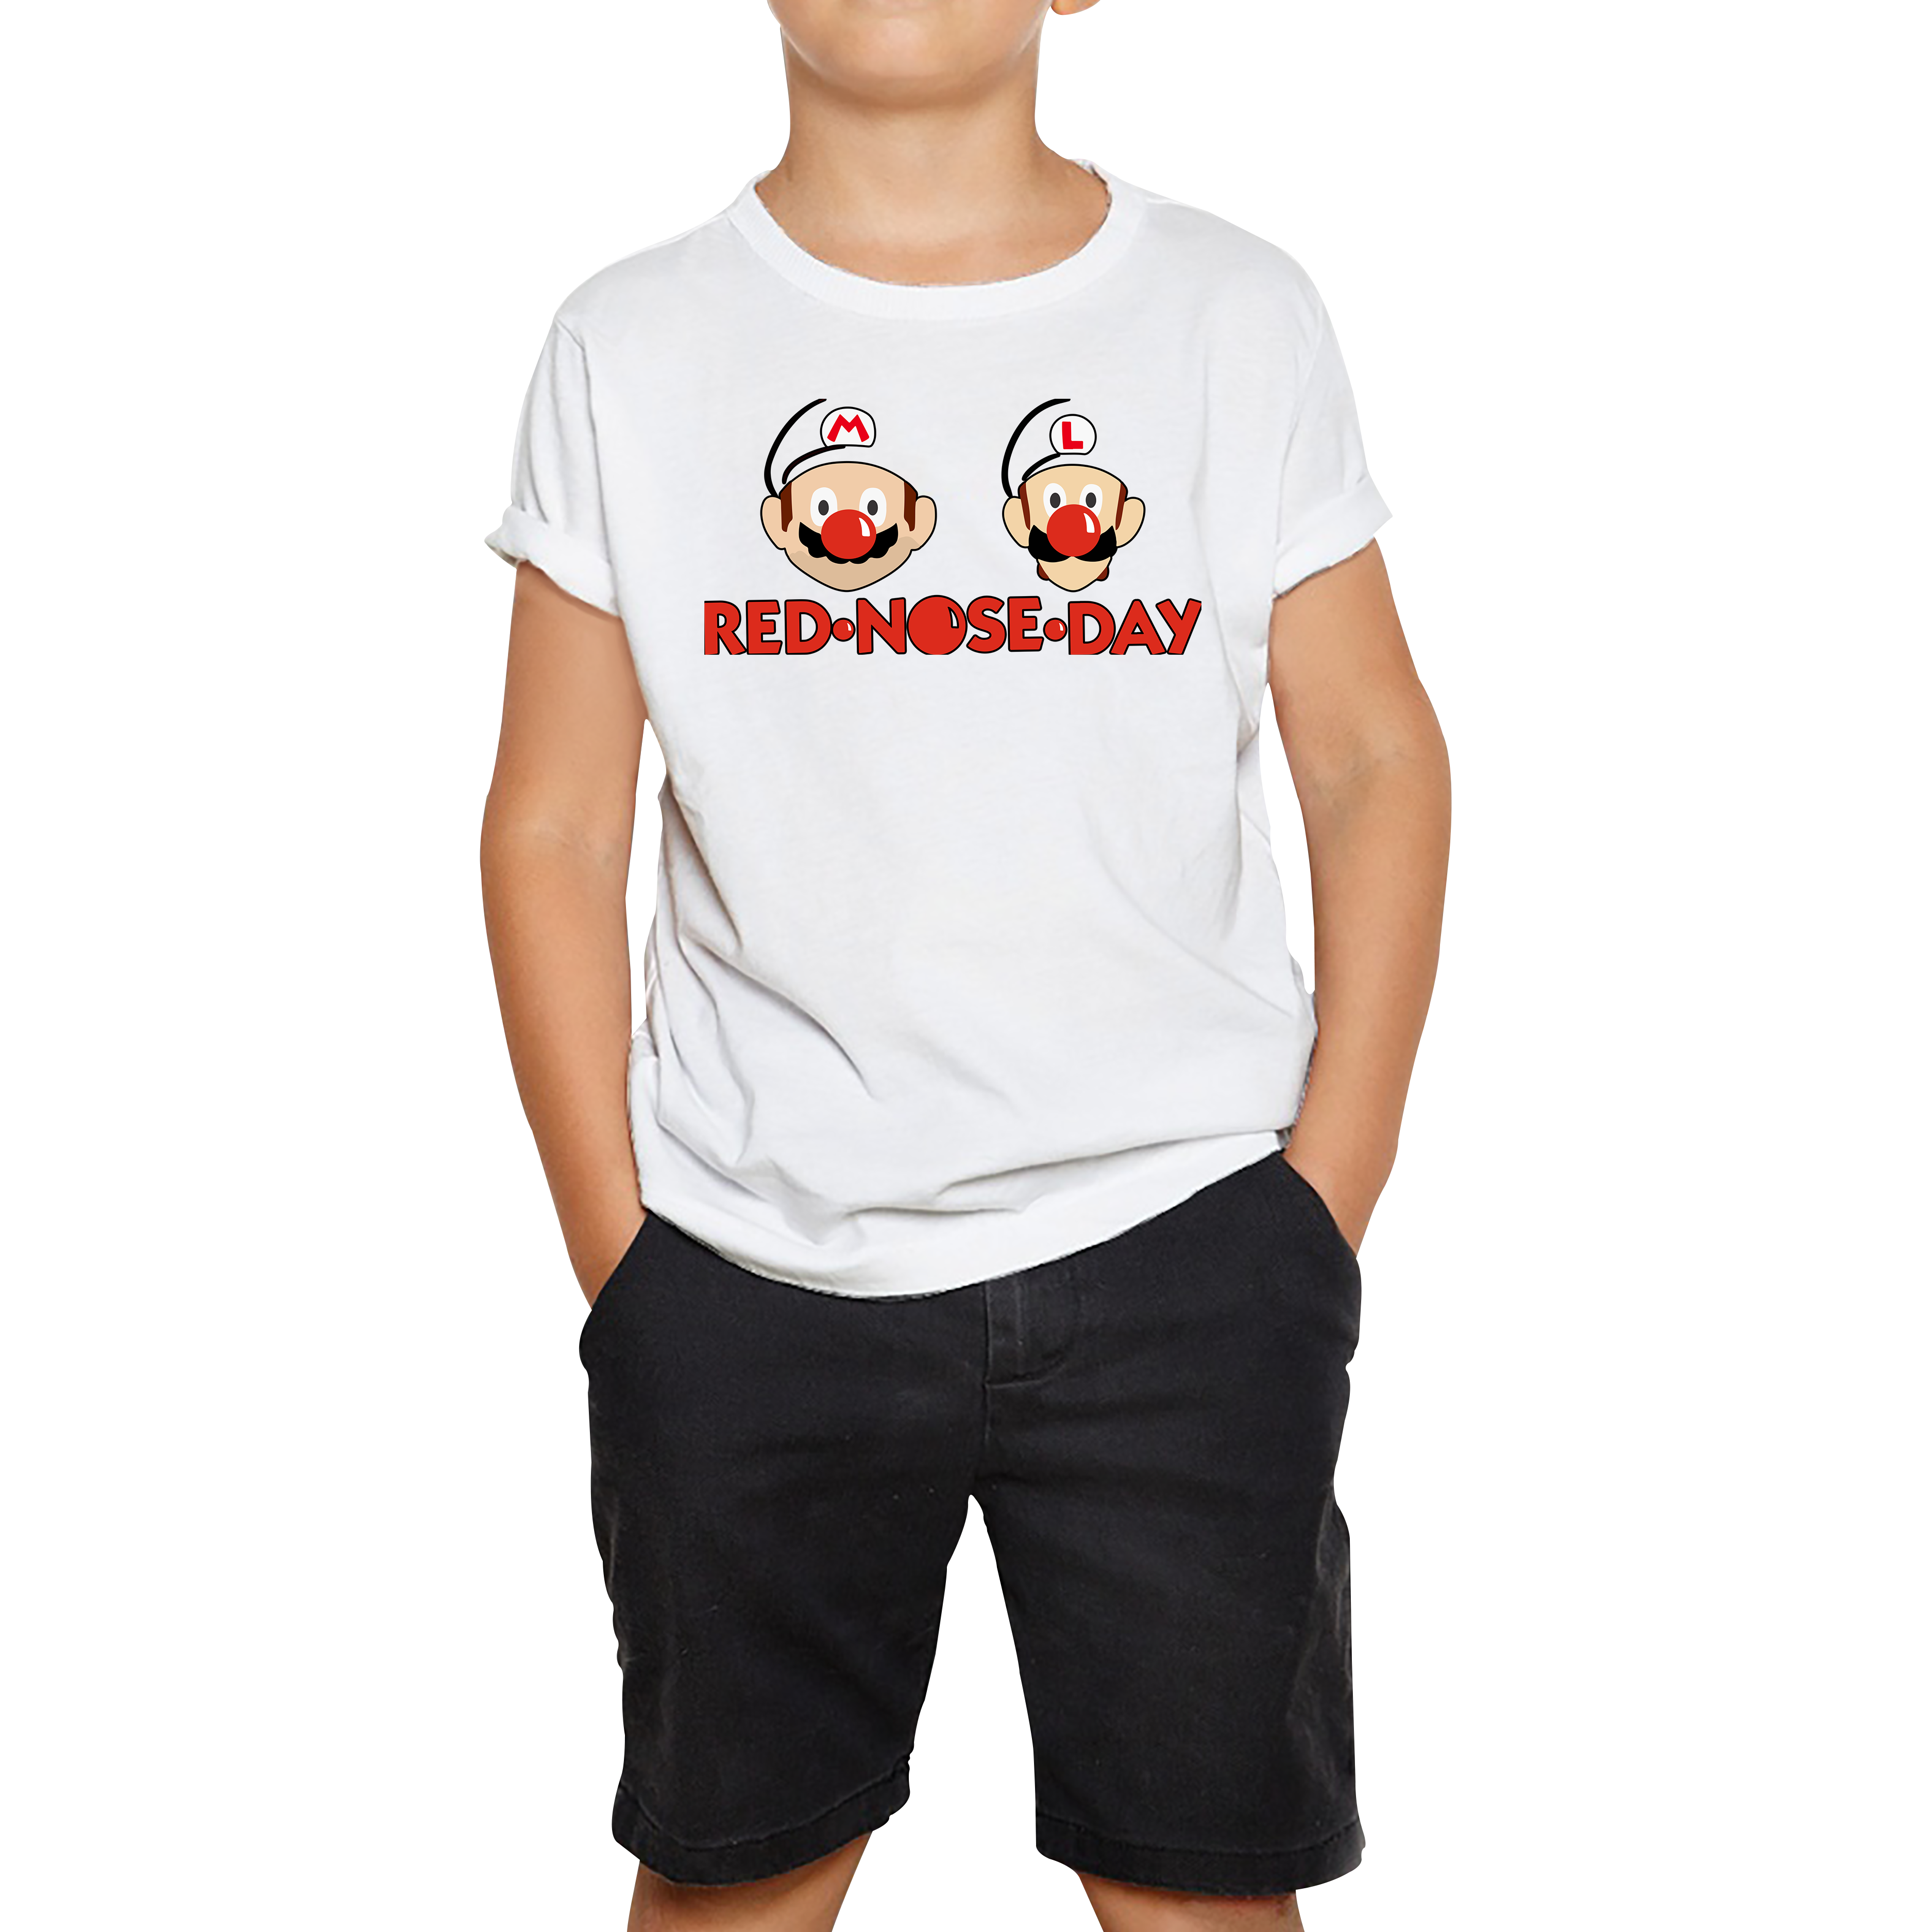 Super Mario Bros Red Nose Day Kids T Shirt. 50% Goes To Charity